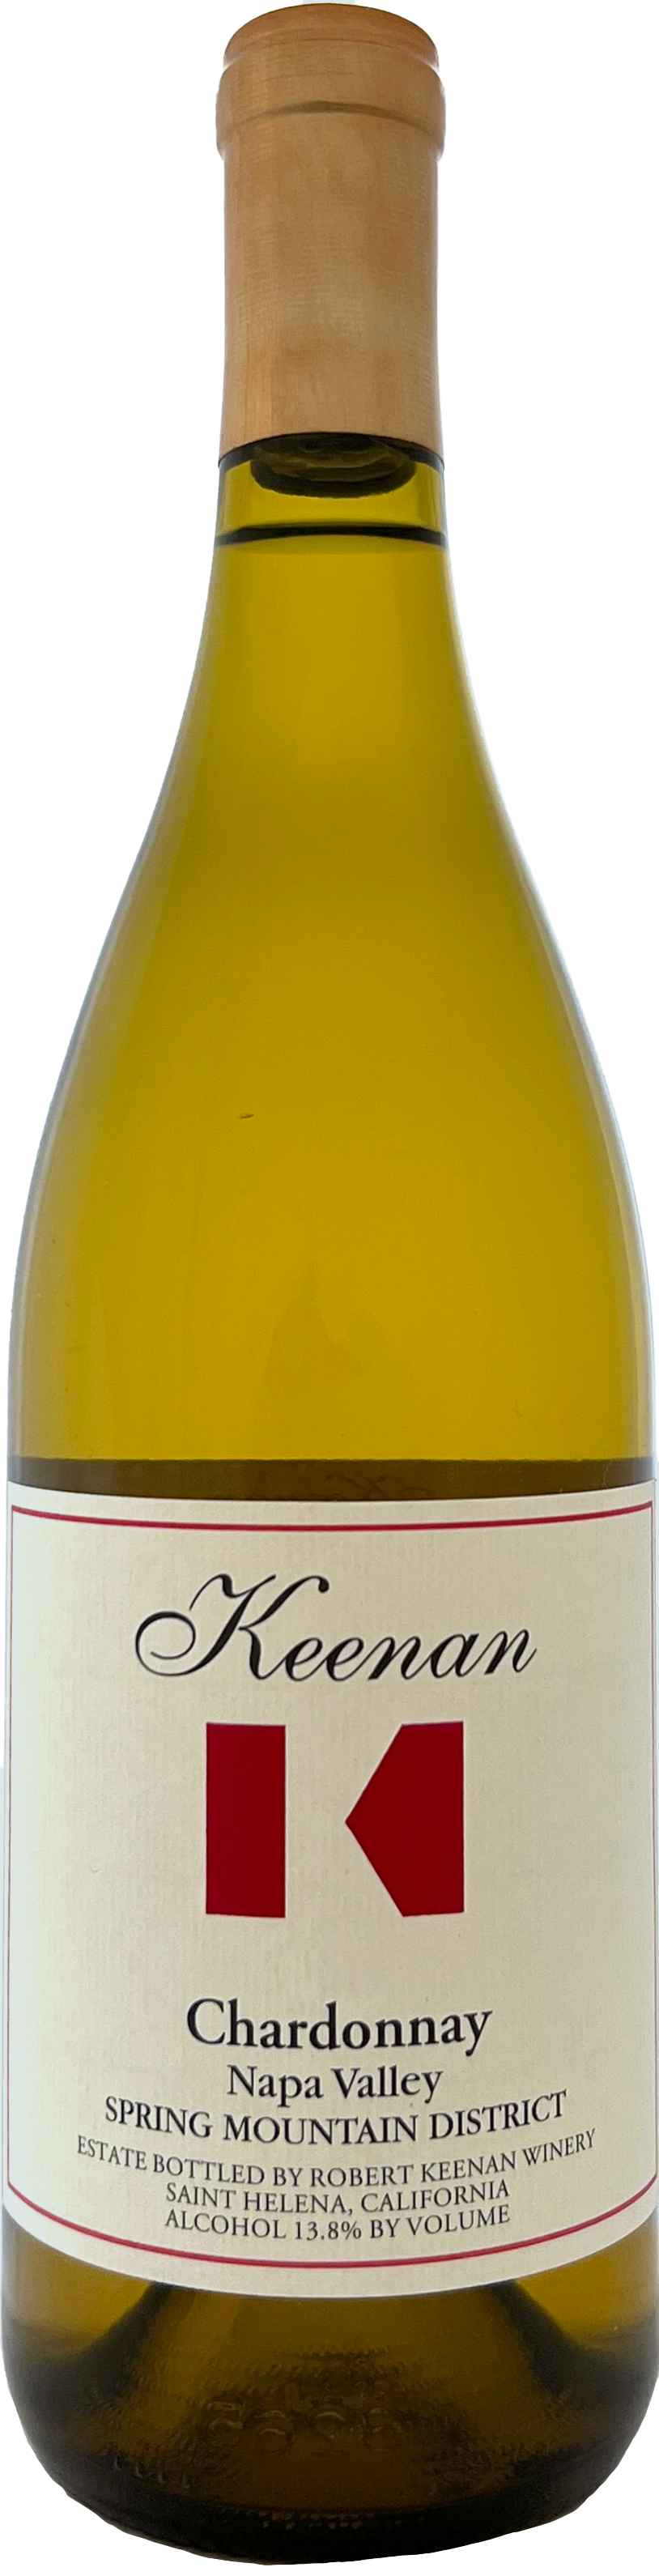 Product Image for 2021 Chardonnay Spring Mt. District